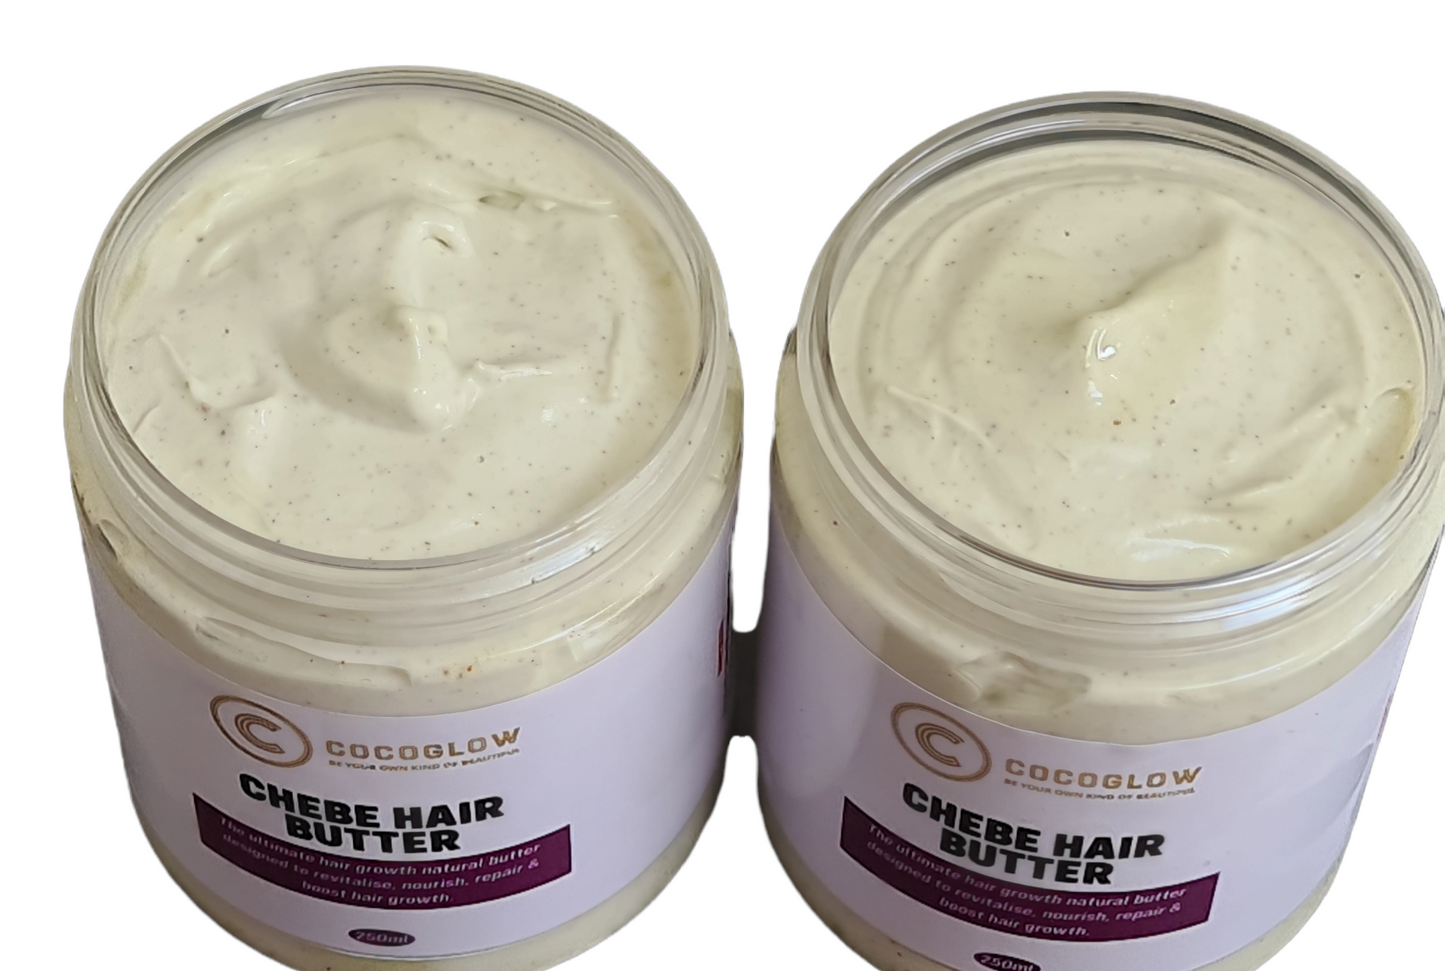 Chebe hair growth butter (extreme hair growth booster)